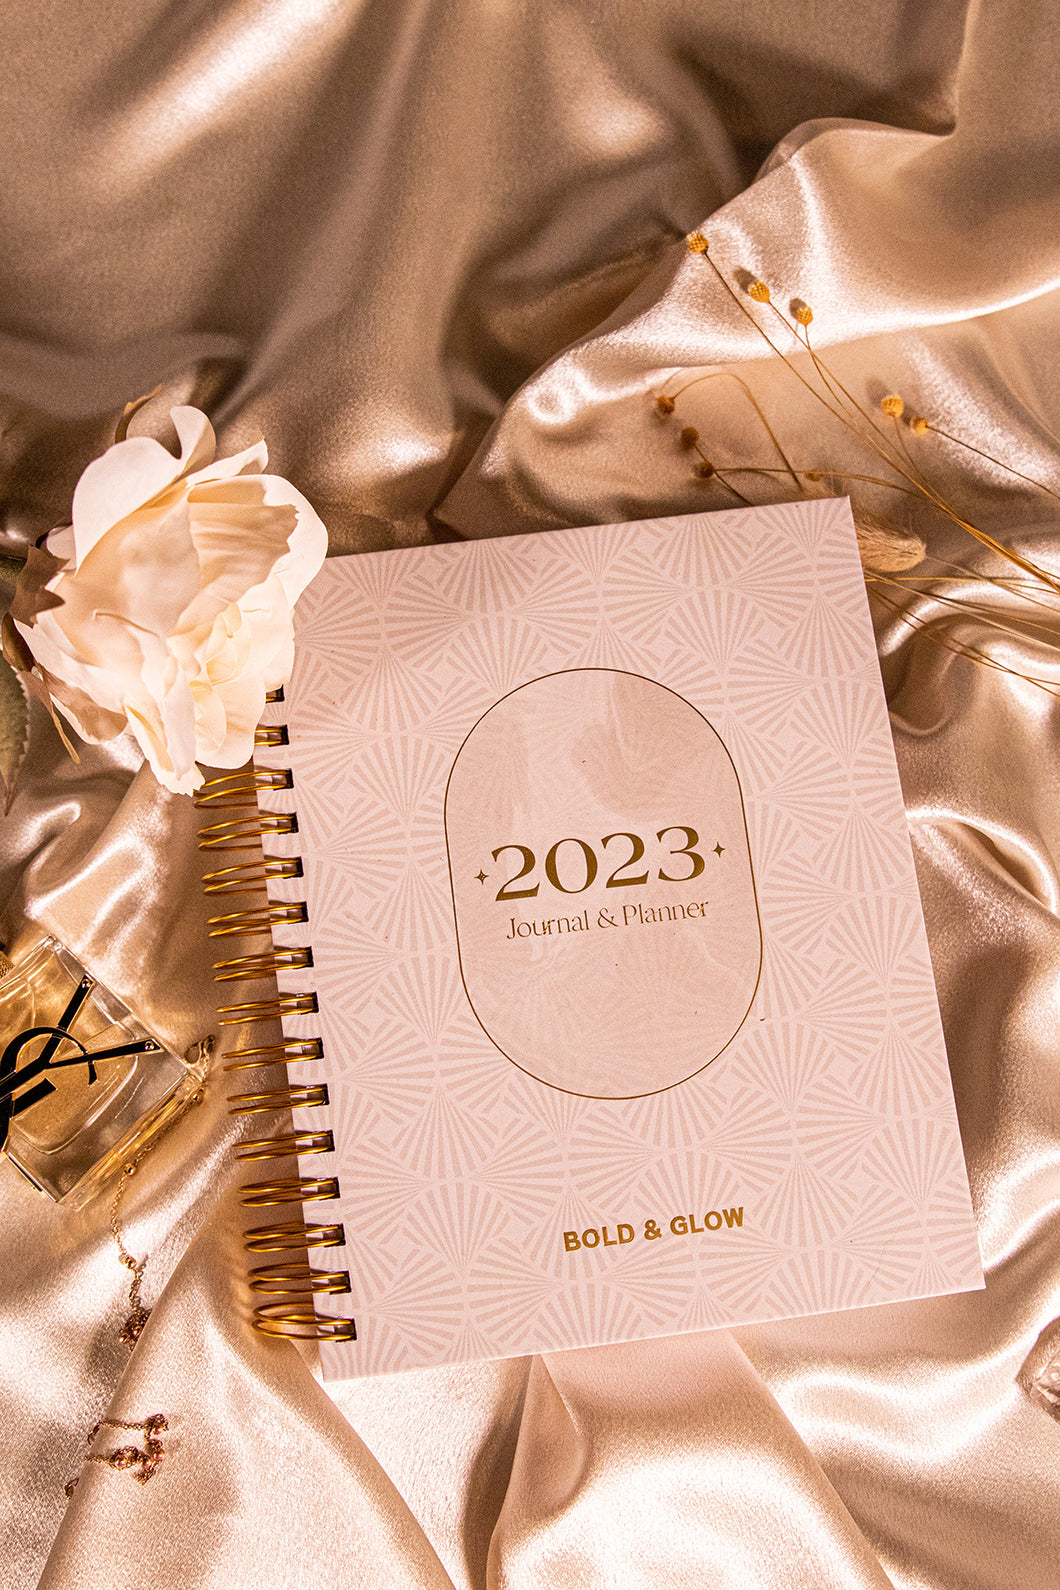 2023 Bold & Glow Journal and Planner